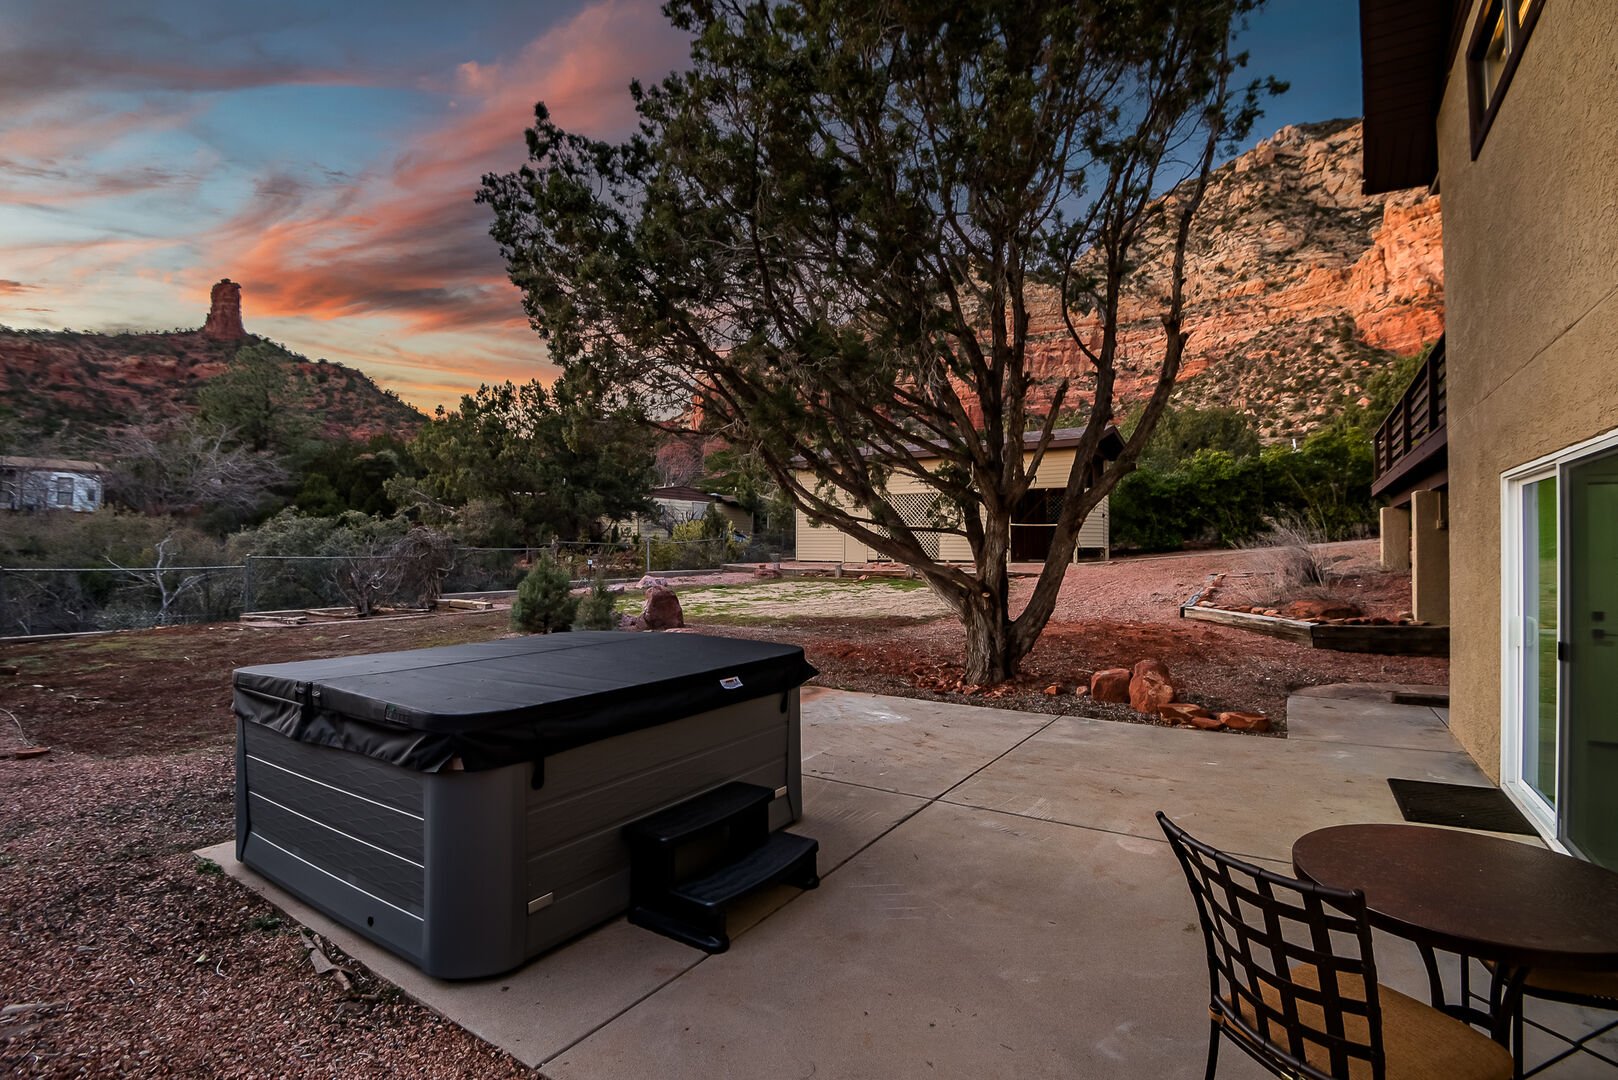 Private hot tub ensures relaxation under the beautiful skies